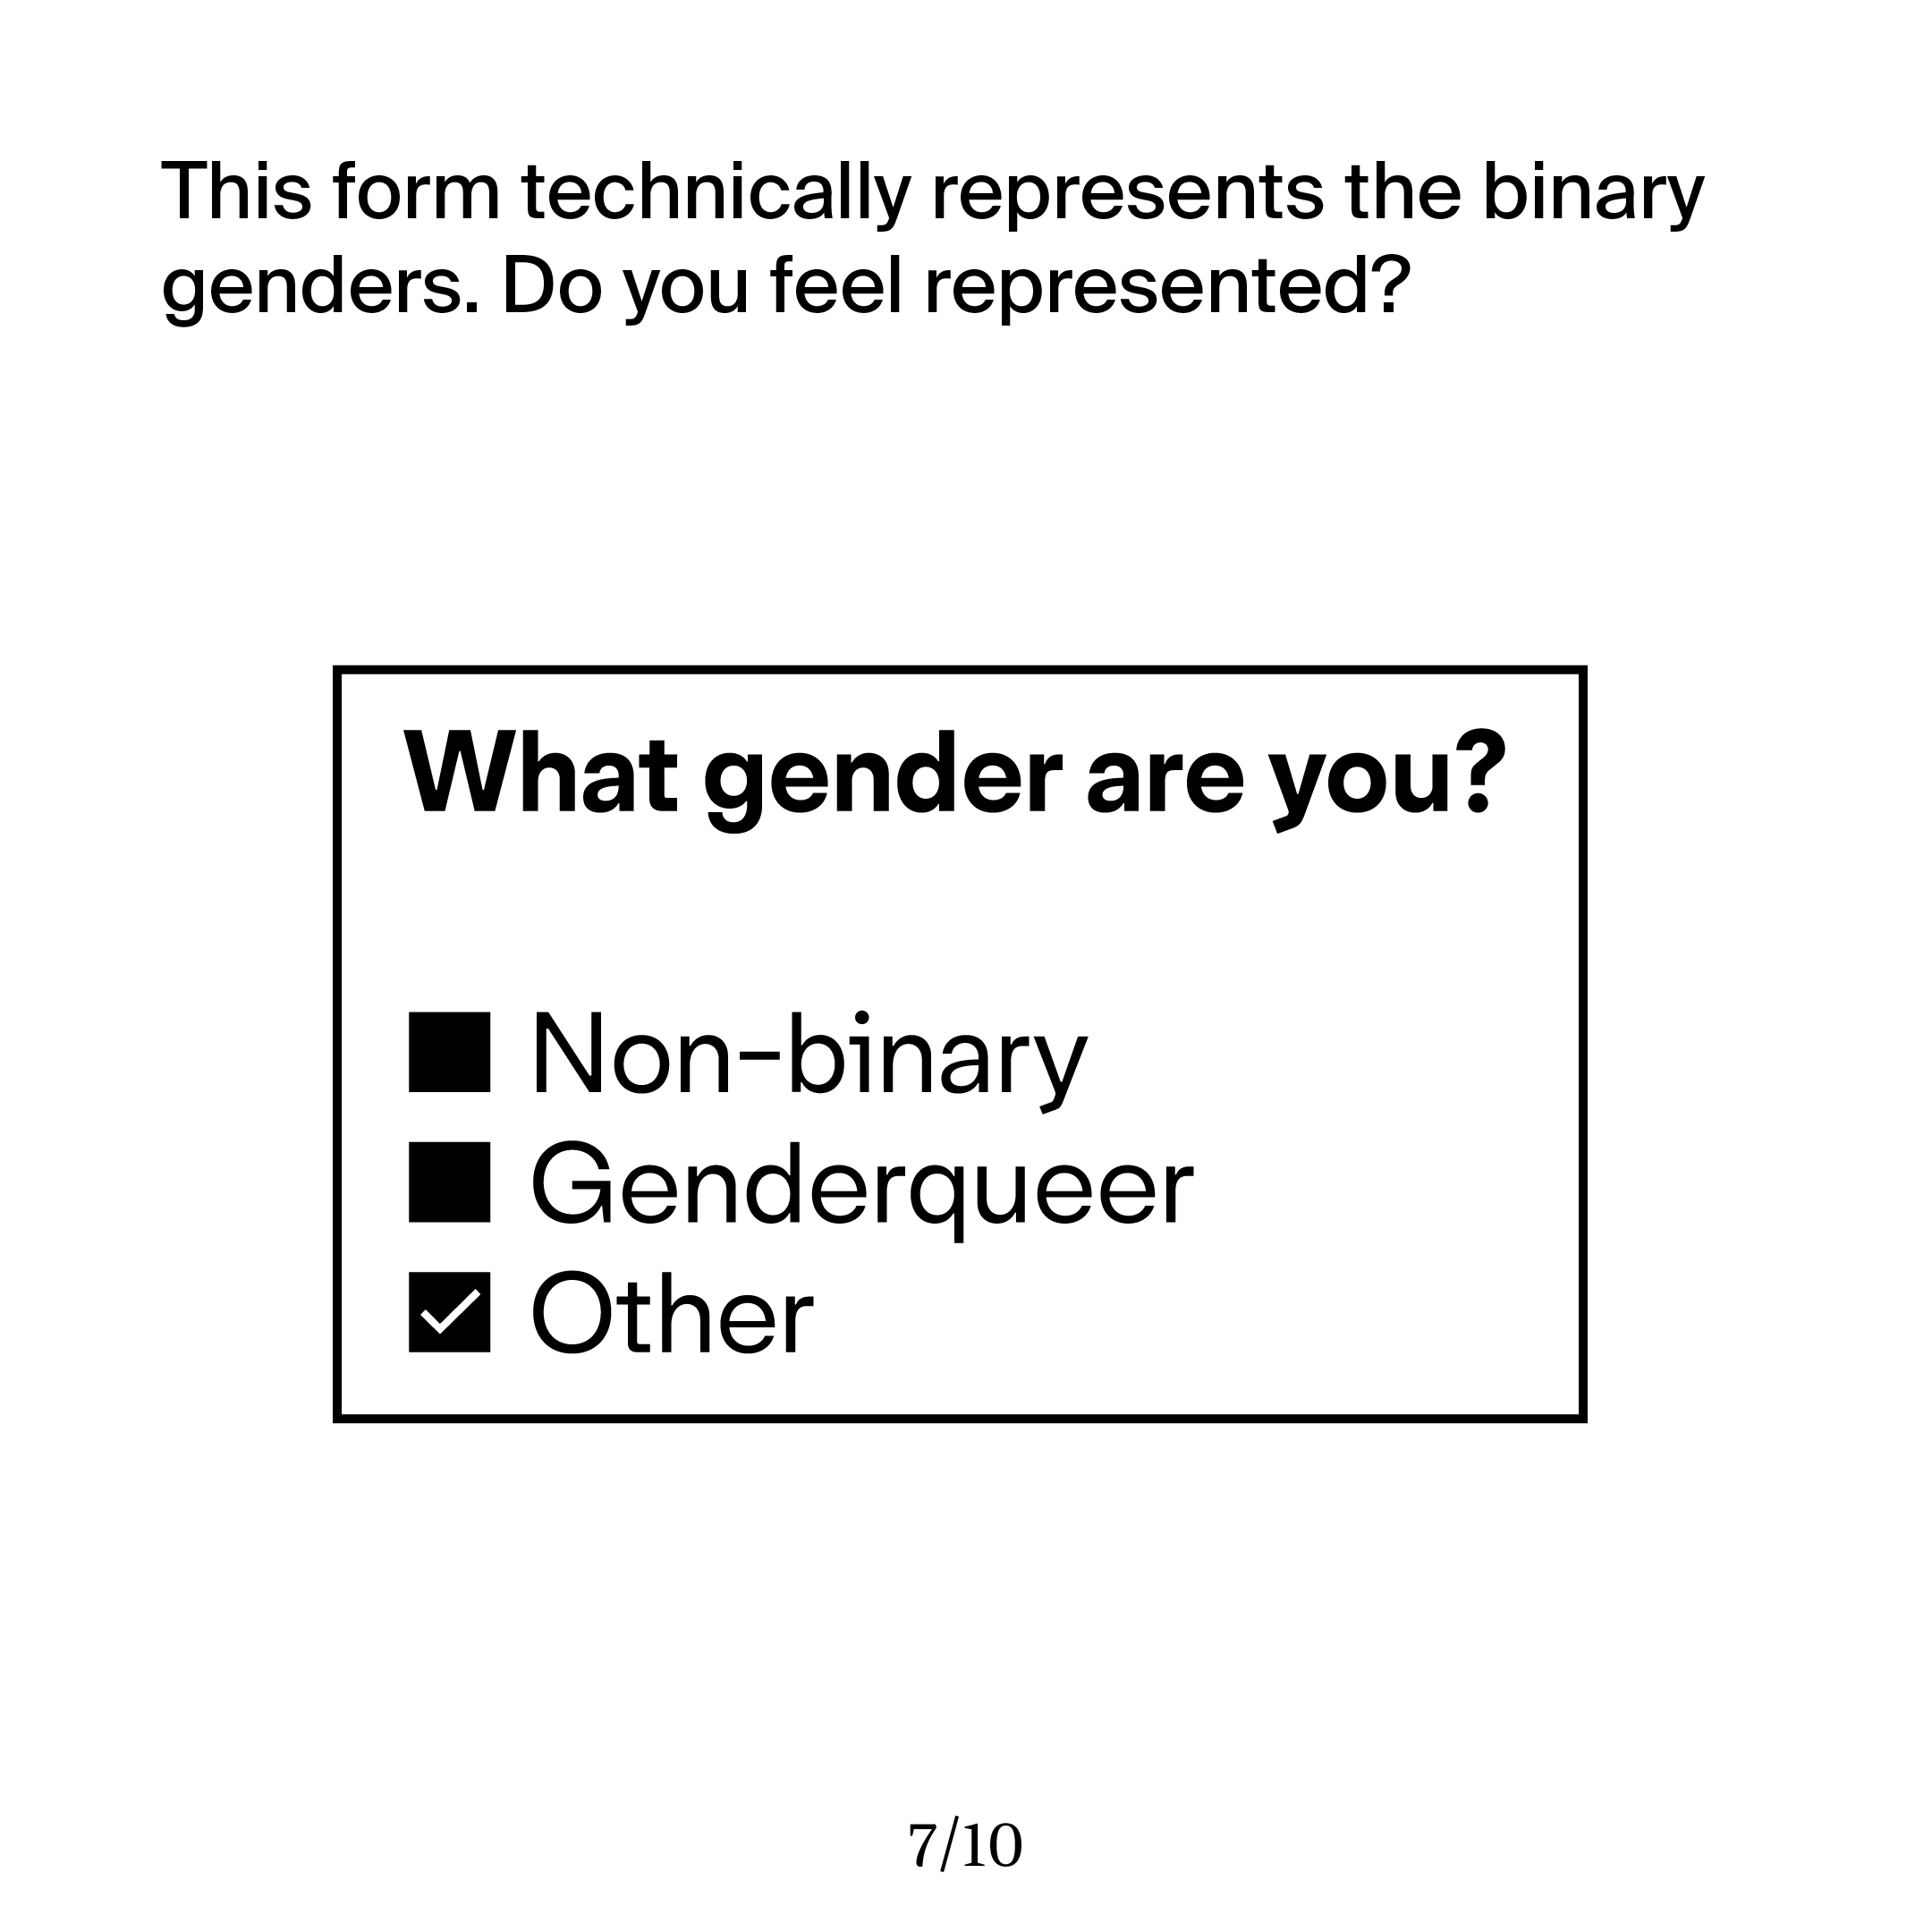 This shows a form asking for the users gender, with three options: Non-binary, Genderqueer, or Other. I ask the viewer if they truly feel represented by this form, or if it feels exclusionary even though the binary genders are technically included.